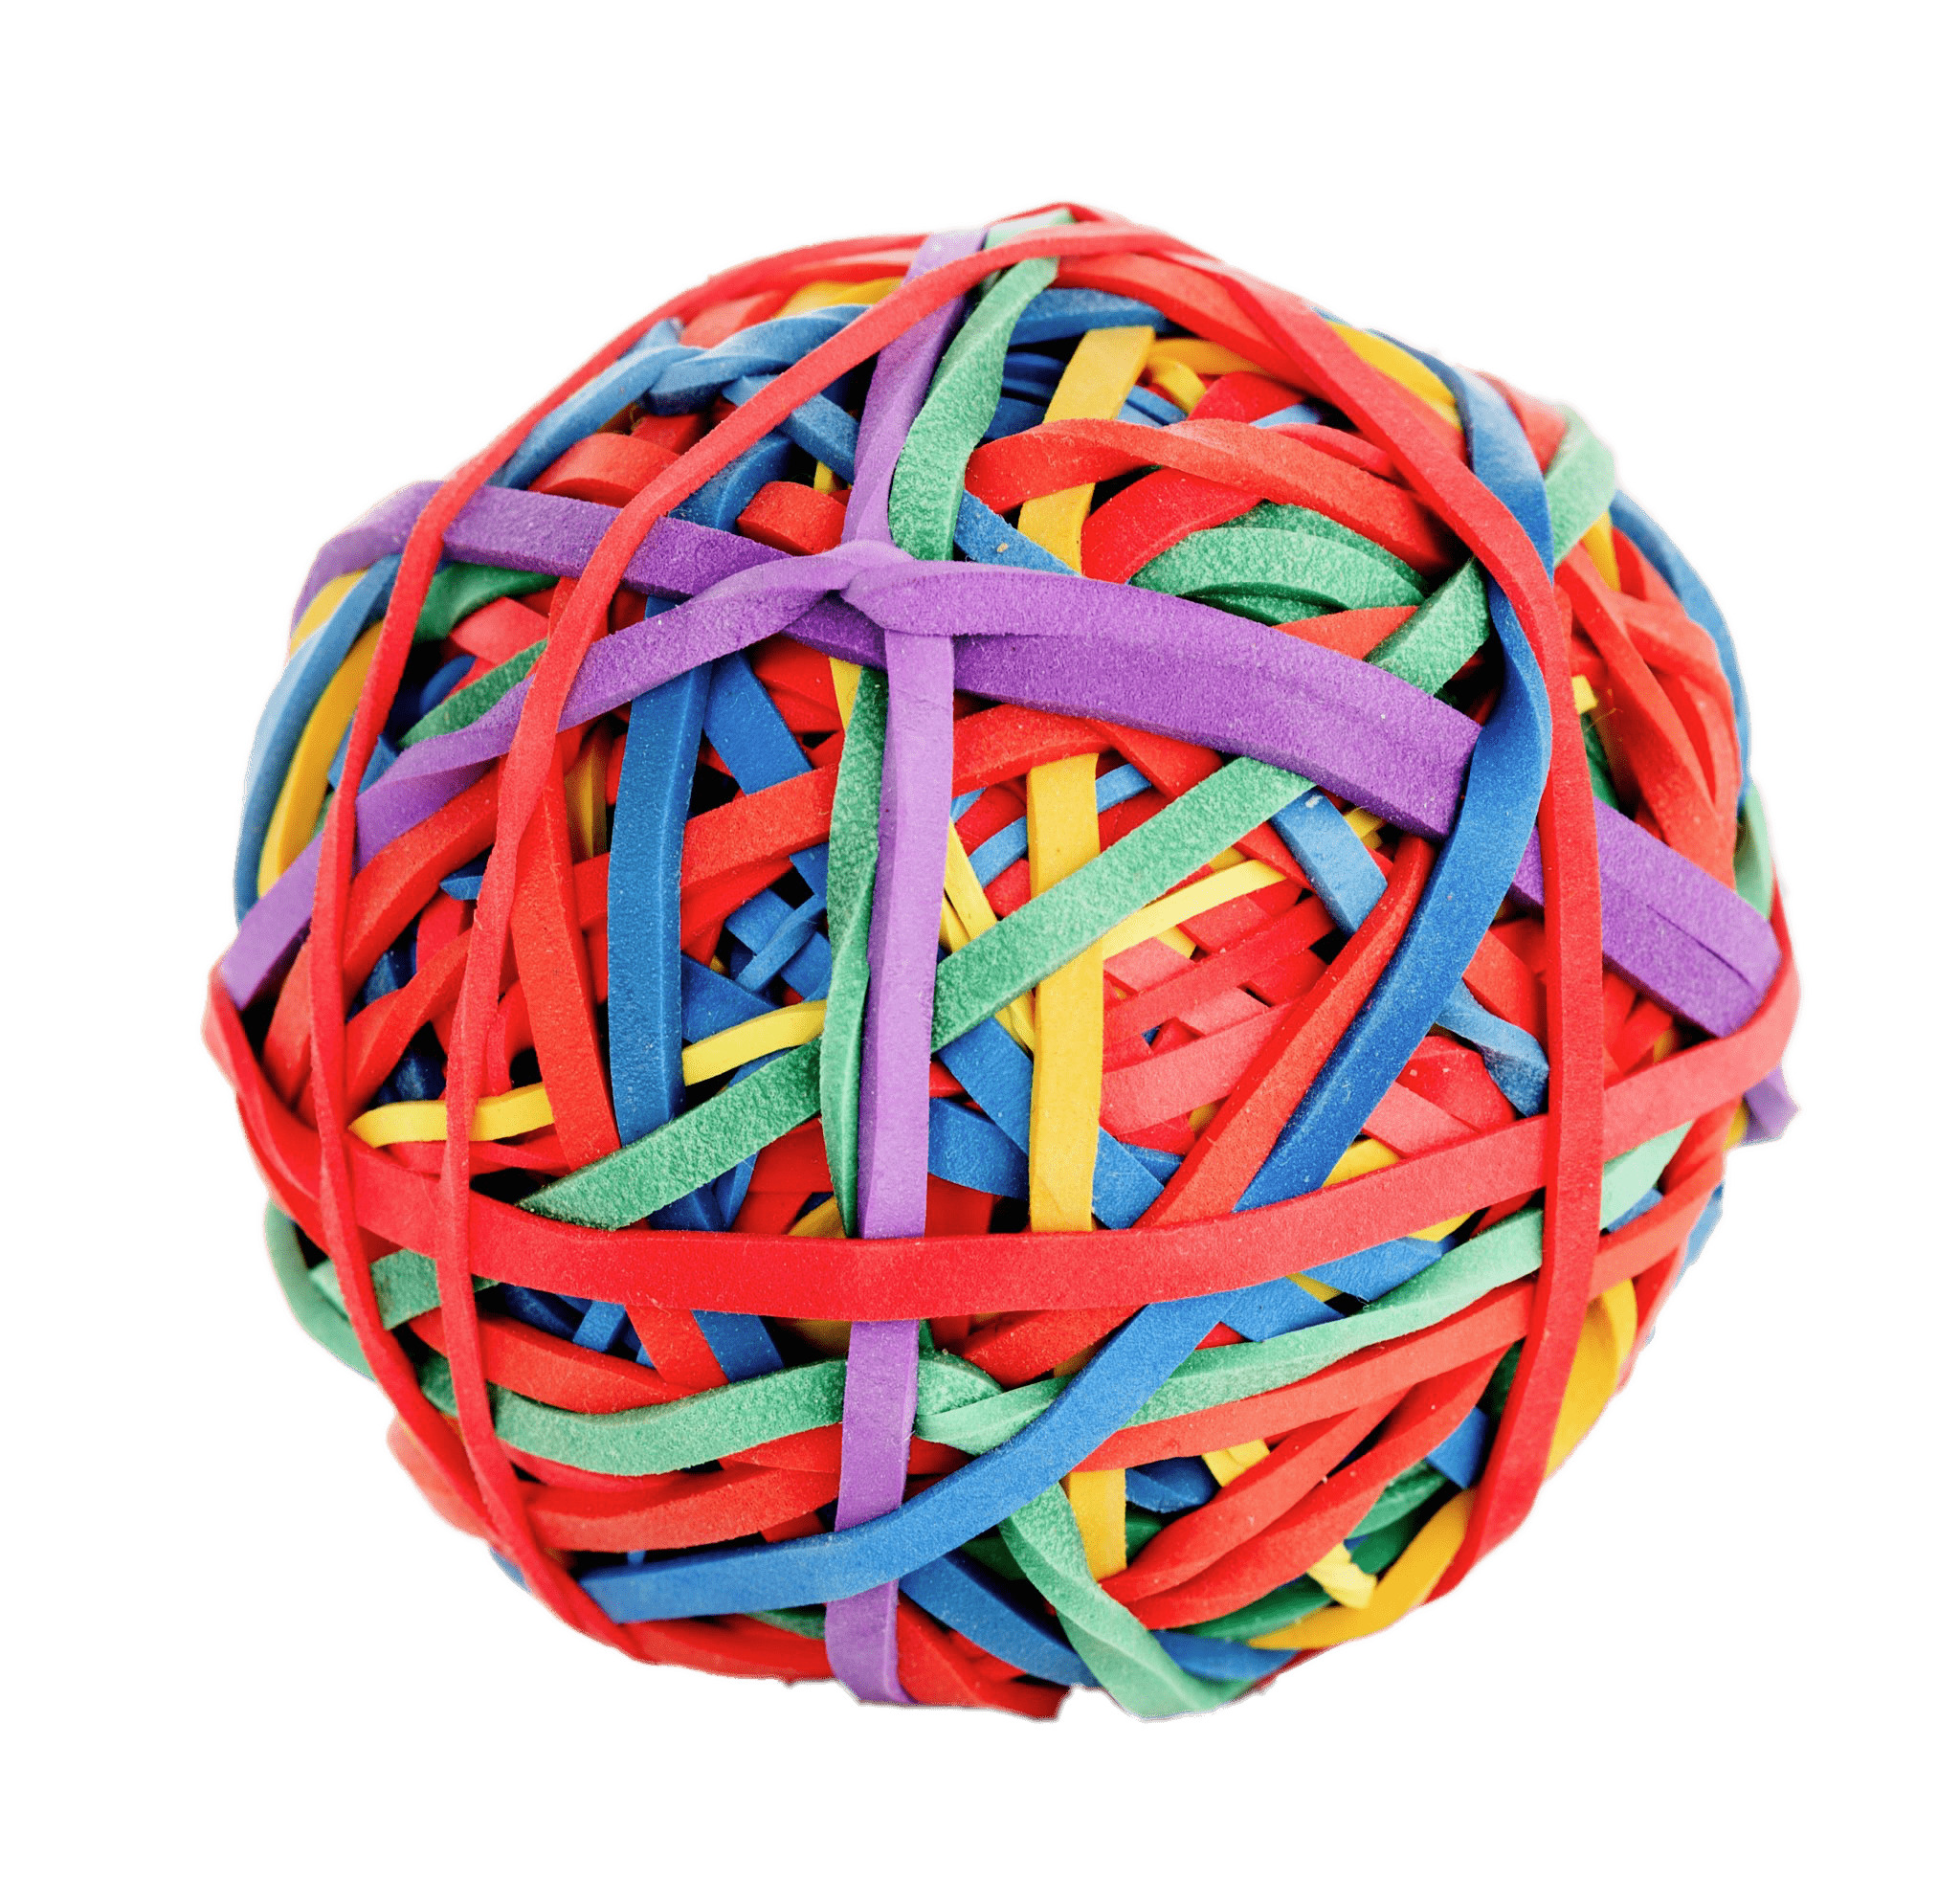 Ball Of Rubber Bands icons